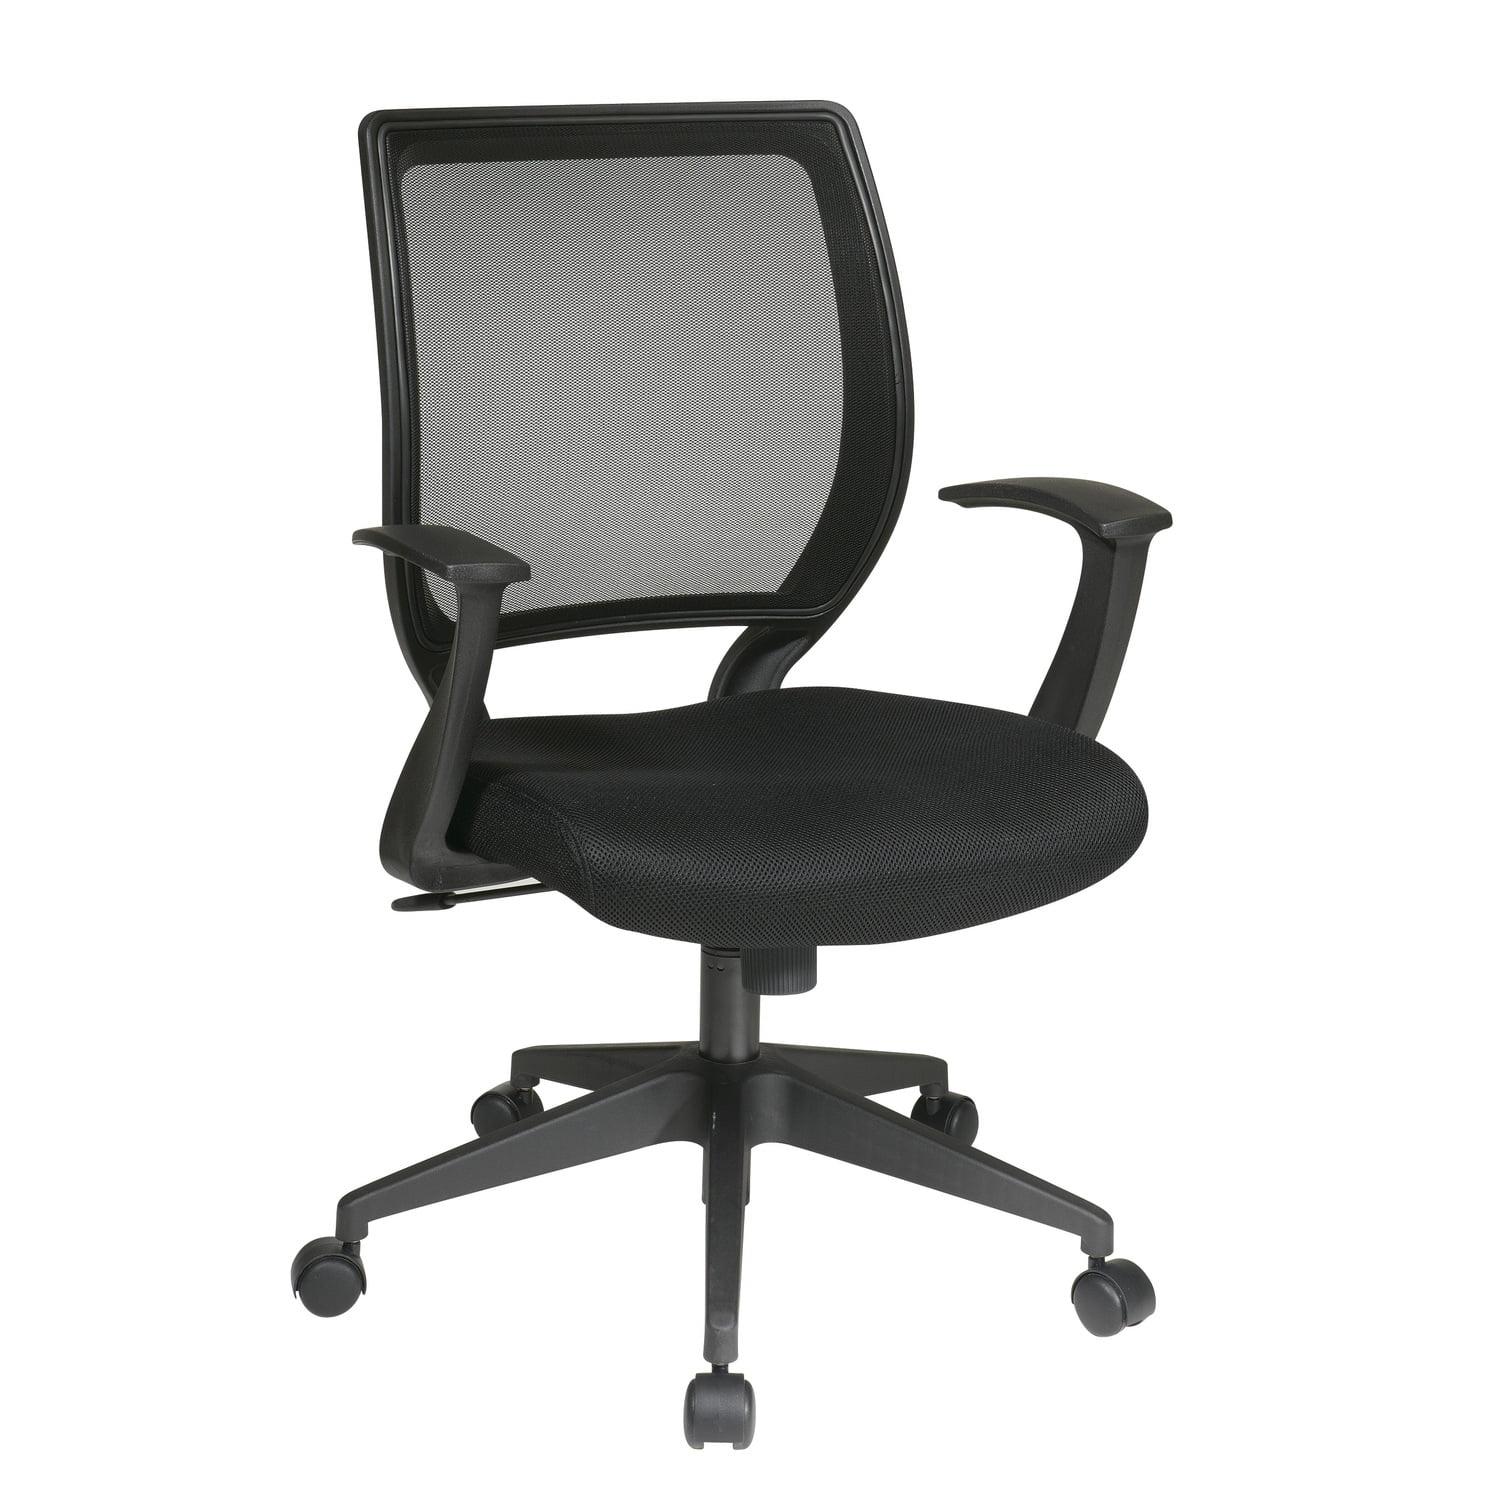 ErgoComfort Black Mesh Swivel Task Chair with Fixed Arms